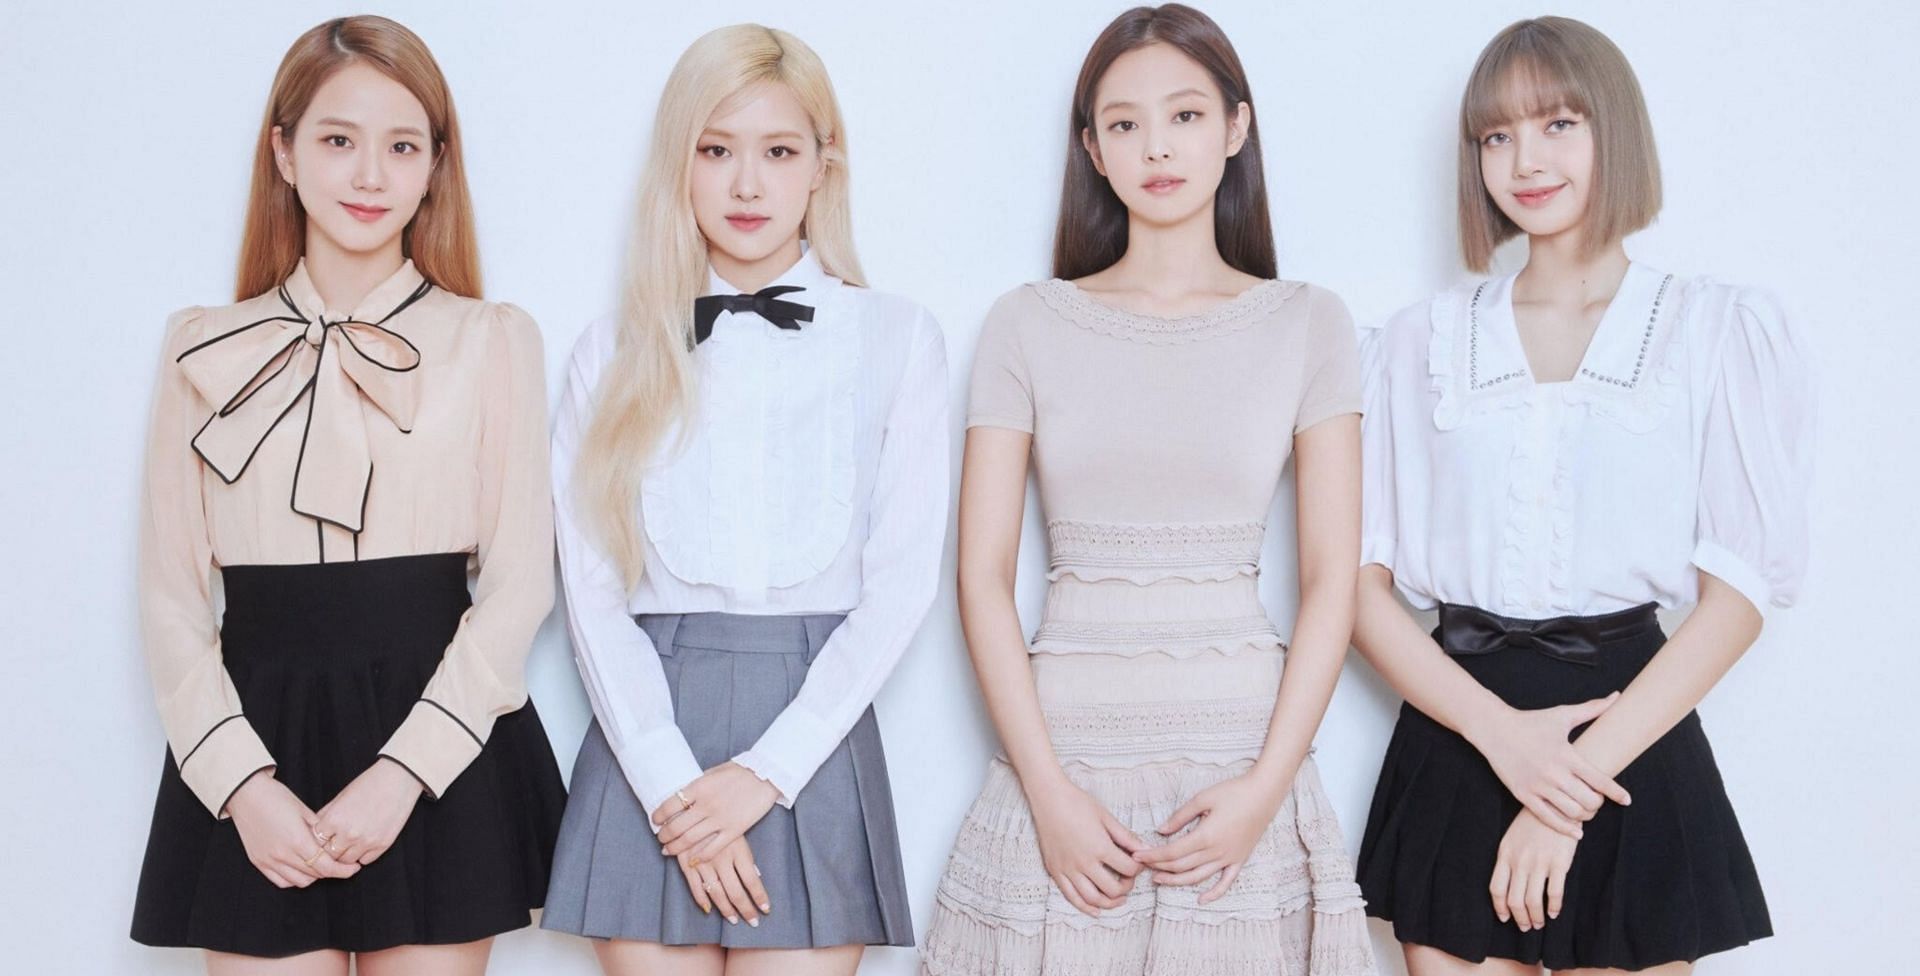 BLACKPINK showcases ethereal beauty in vintage outfits for its Welcoming Collection 2022 photo